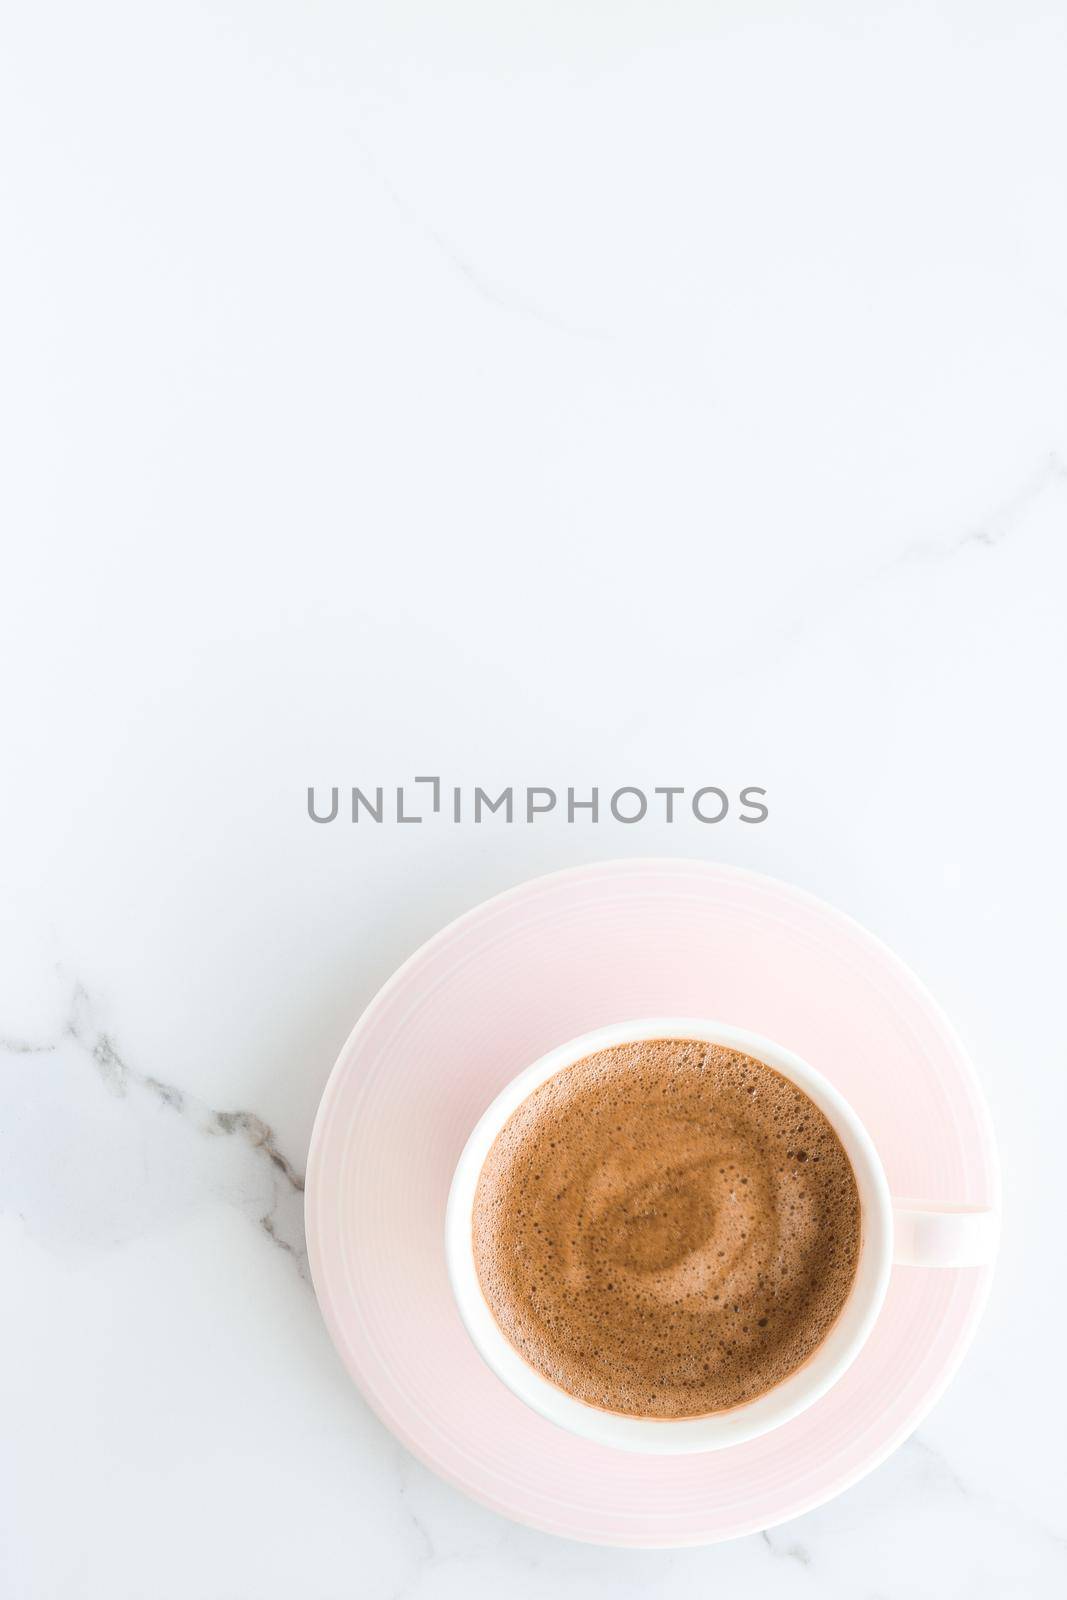 Hot aromatic coffee on marble, flatlay by Anneleven